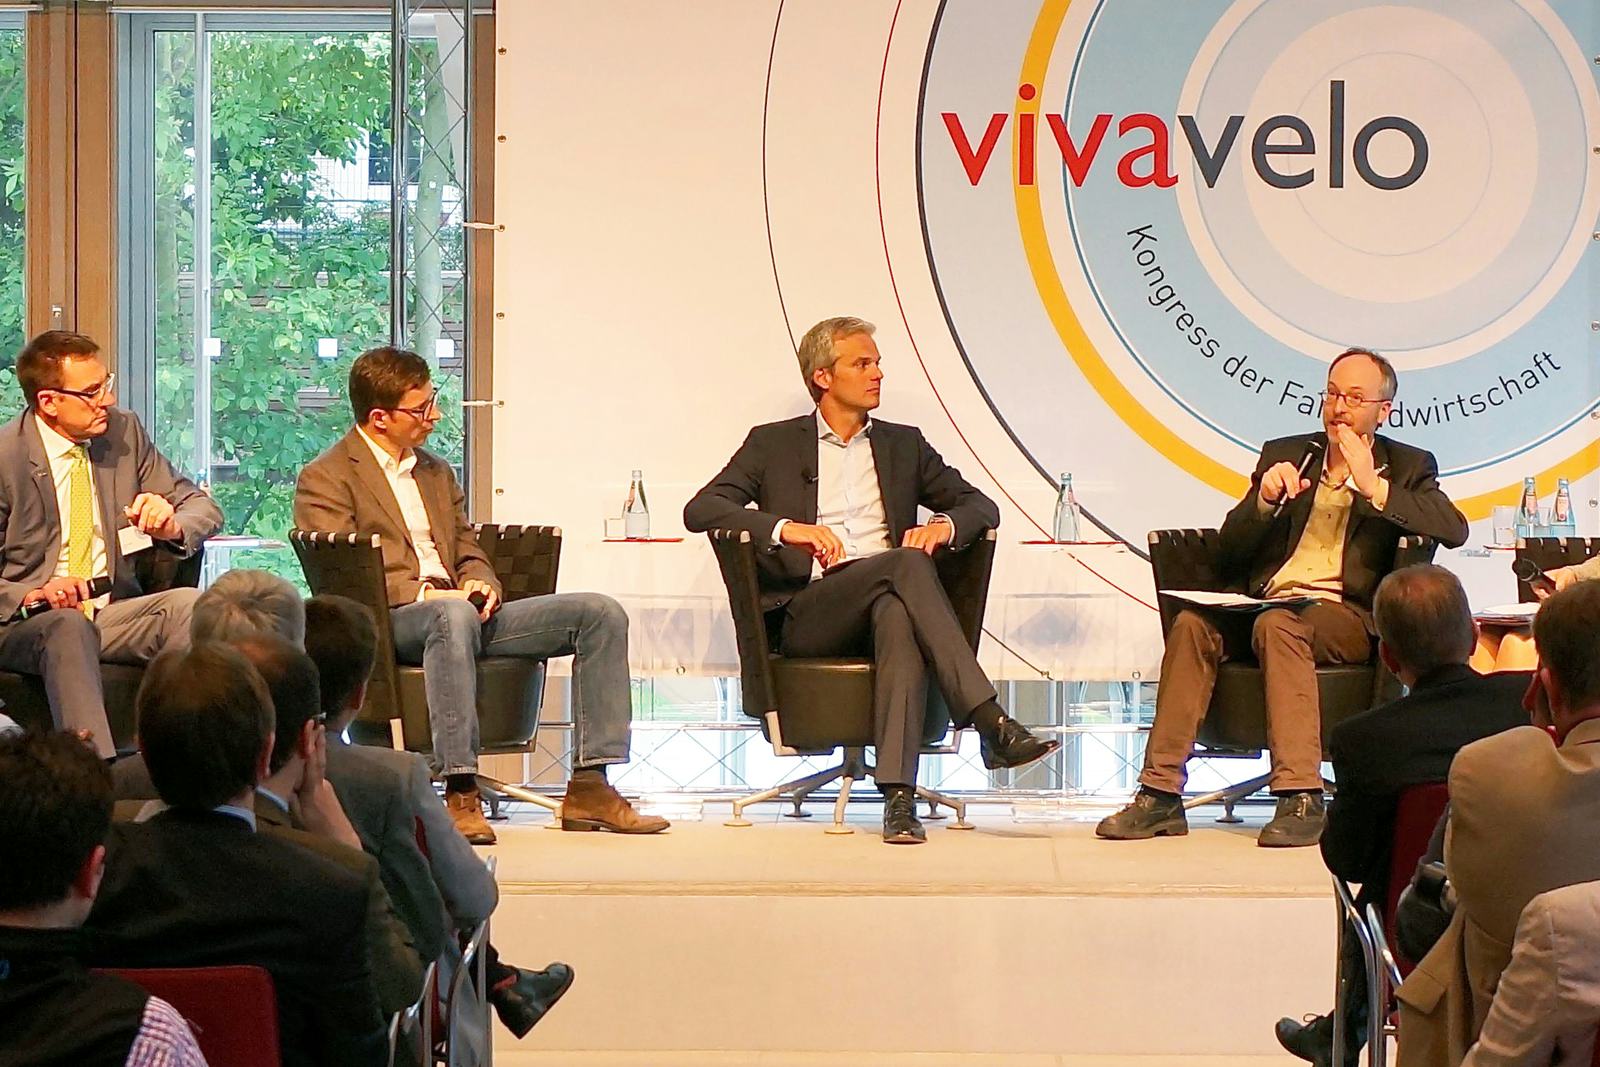 Last Monday and Tuesday the Germany industry congress Vivavelo took place in Berlin – Photo Susanne Brüsch